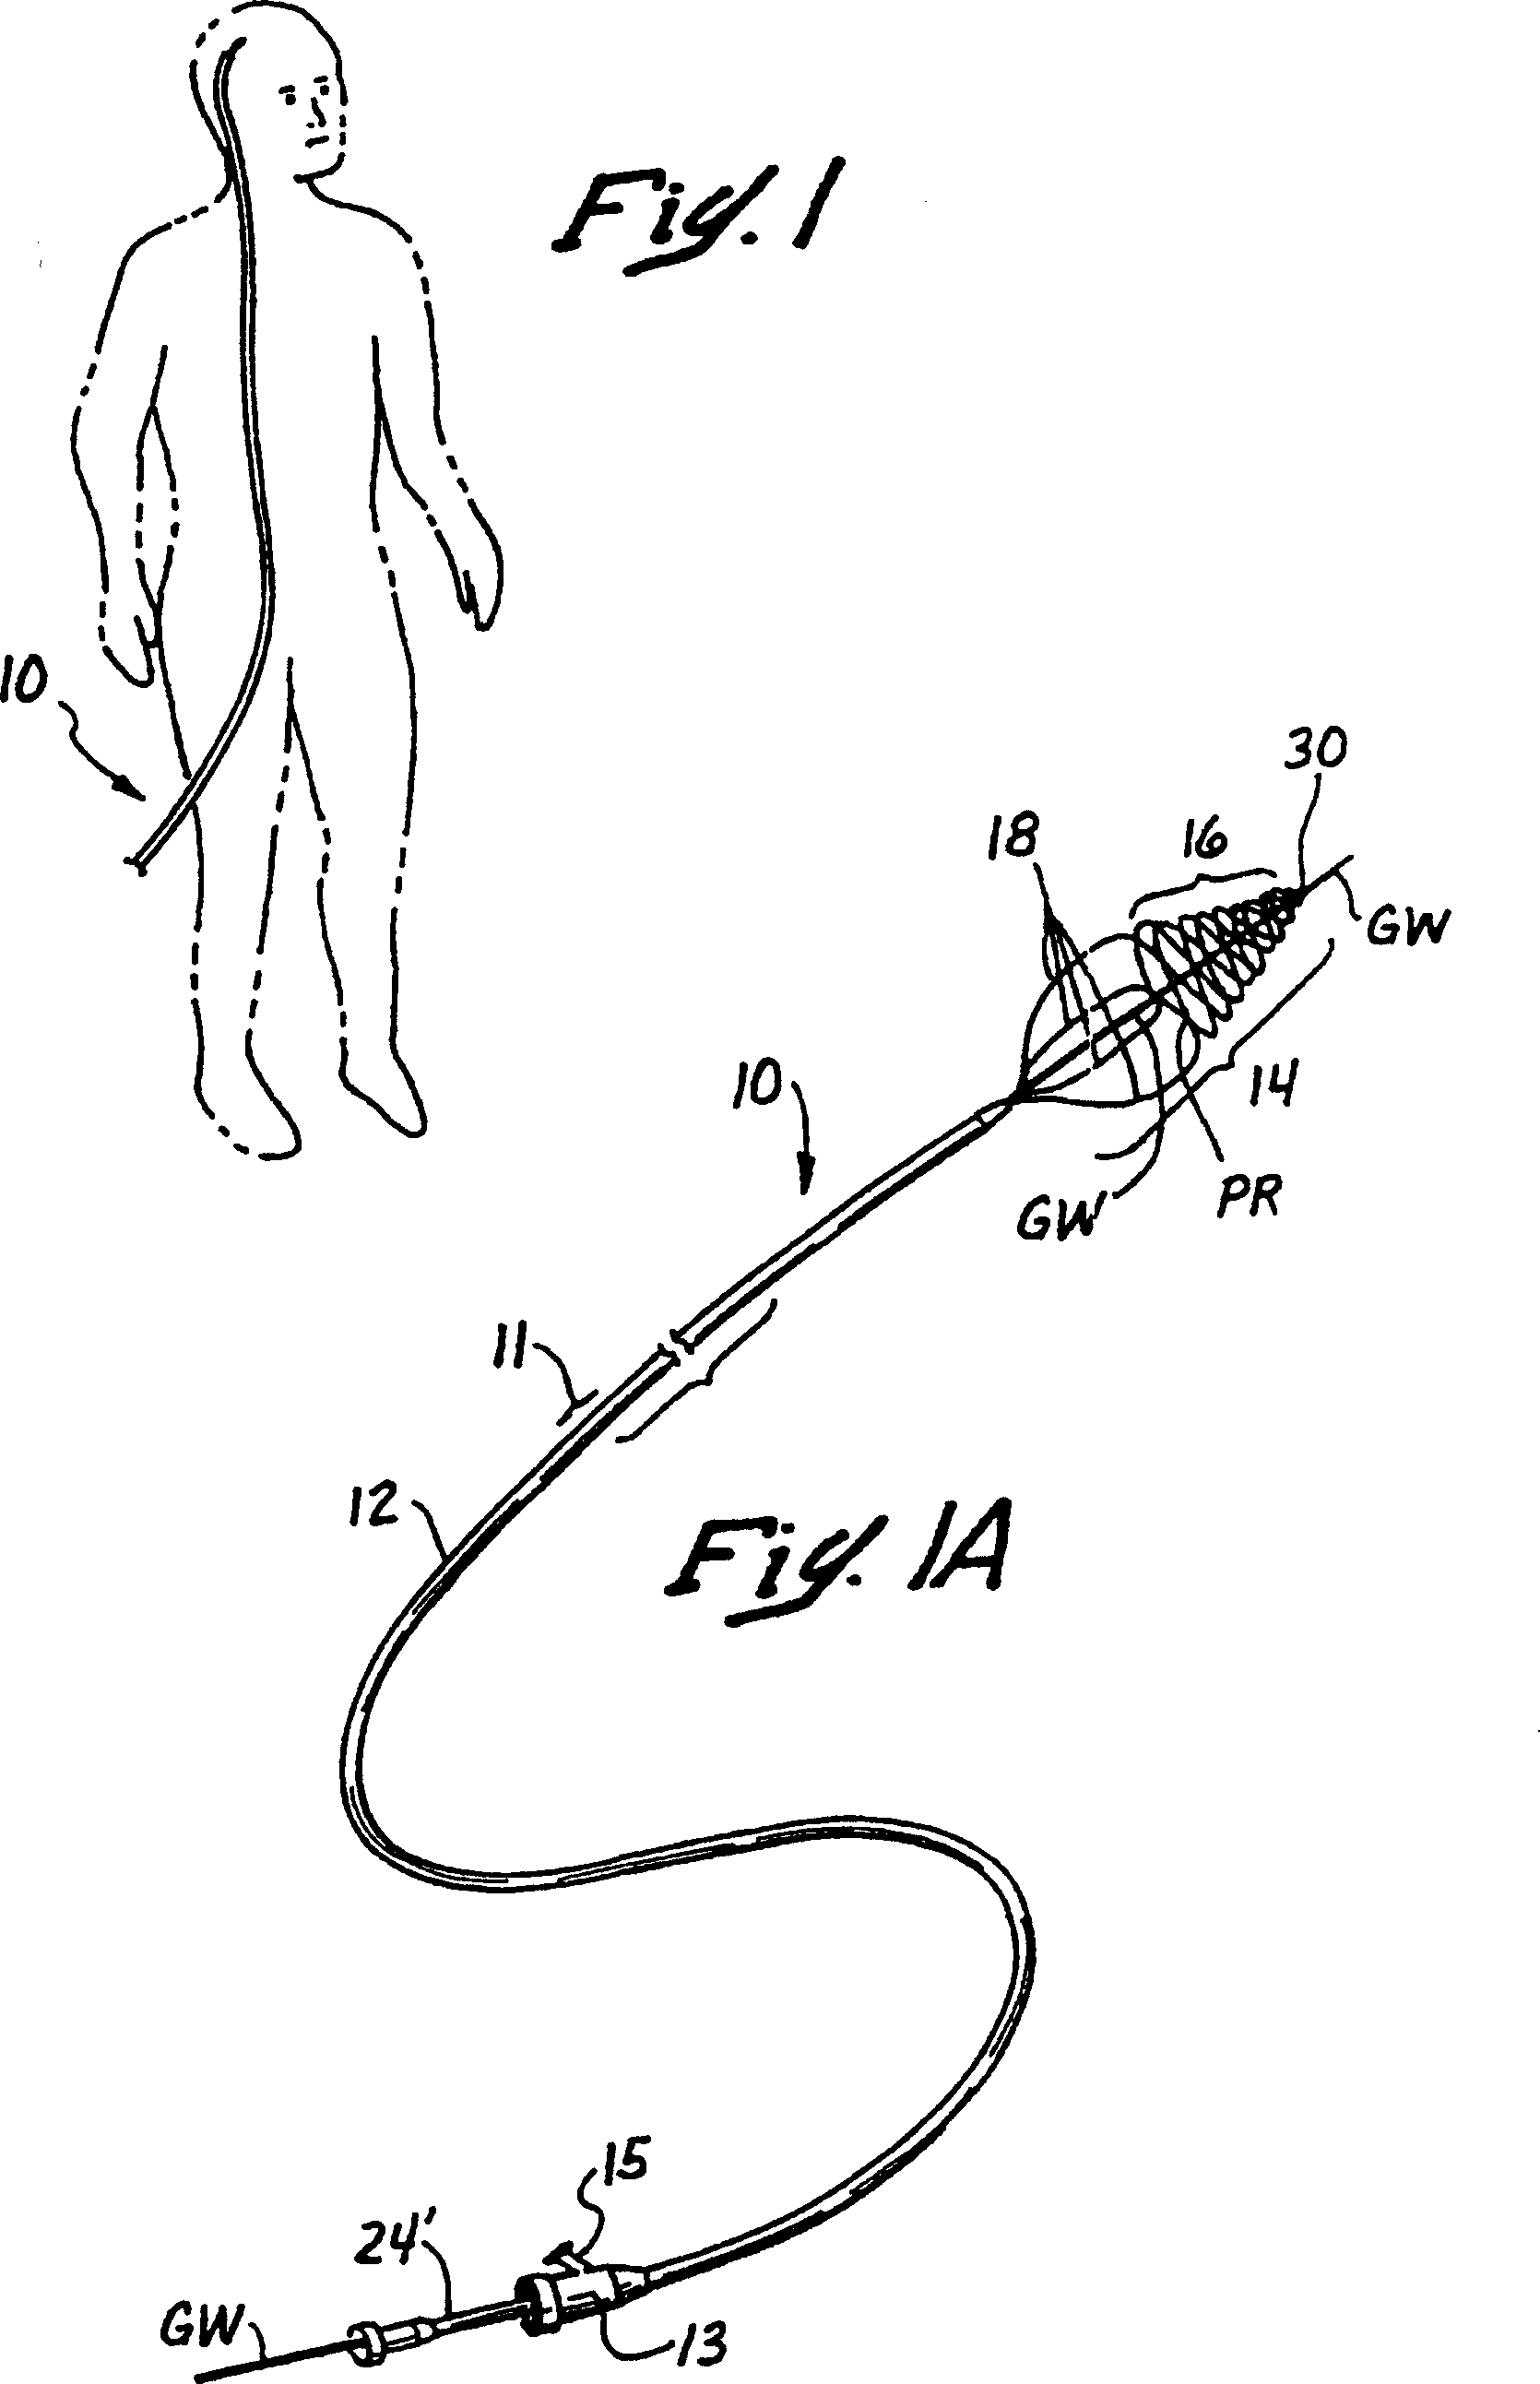 Embolectomy catheters and method for treatment